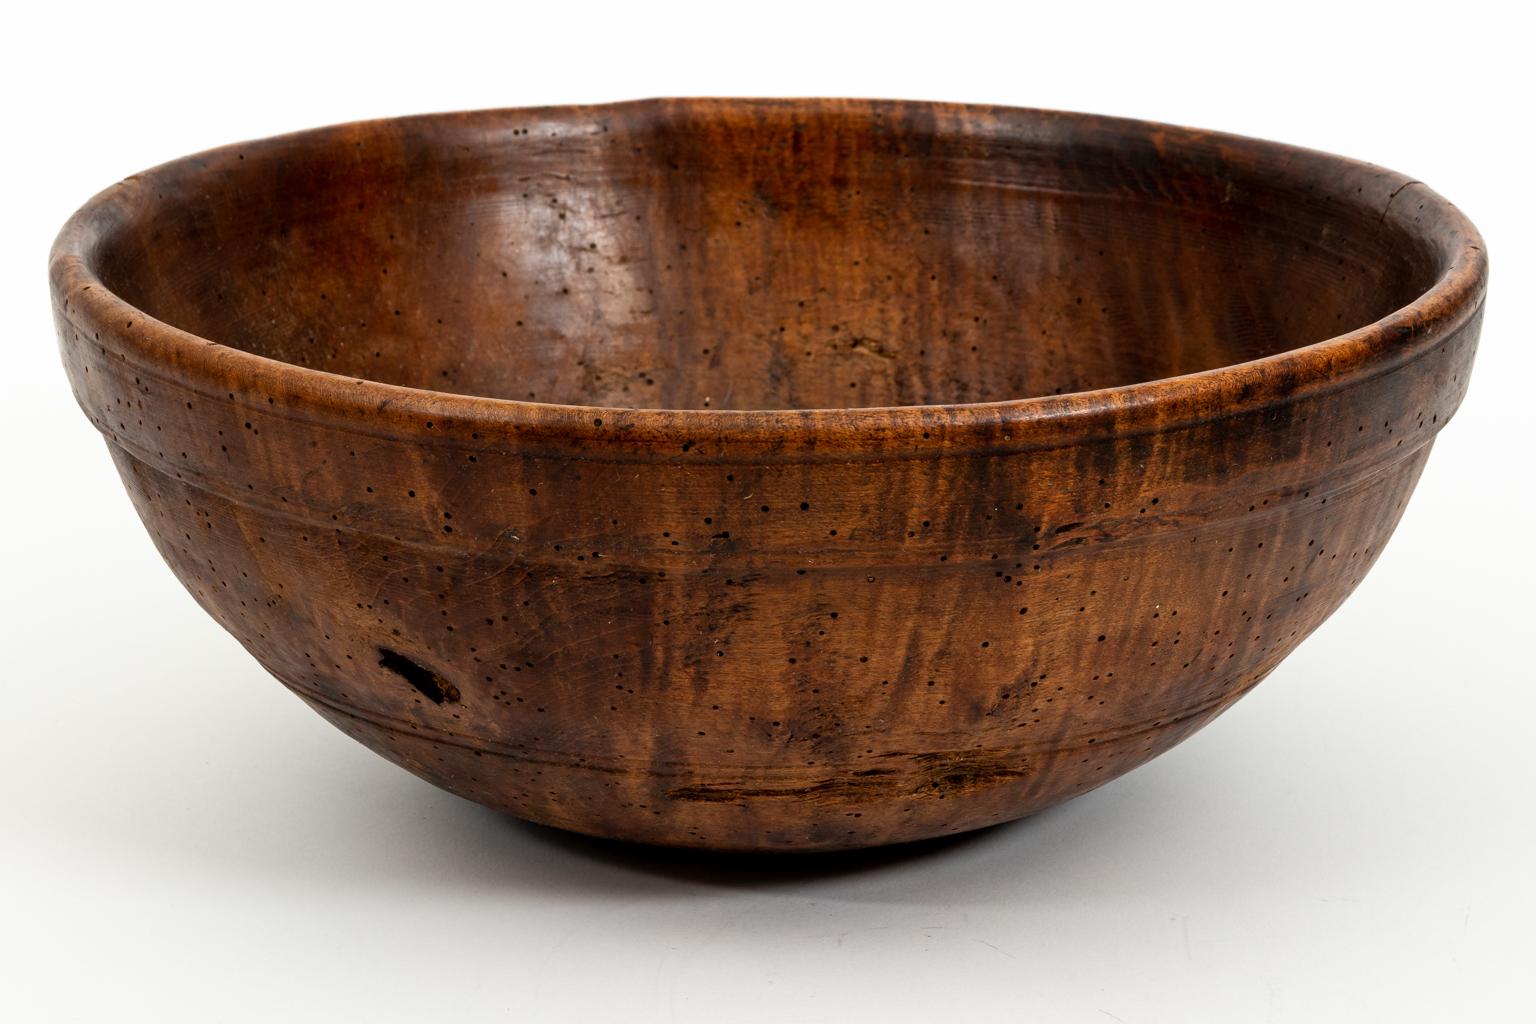 Circa late 18th century bowl in burl and tiger walnut wood. Made in the United States. Please note of wear consistent with antique age.